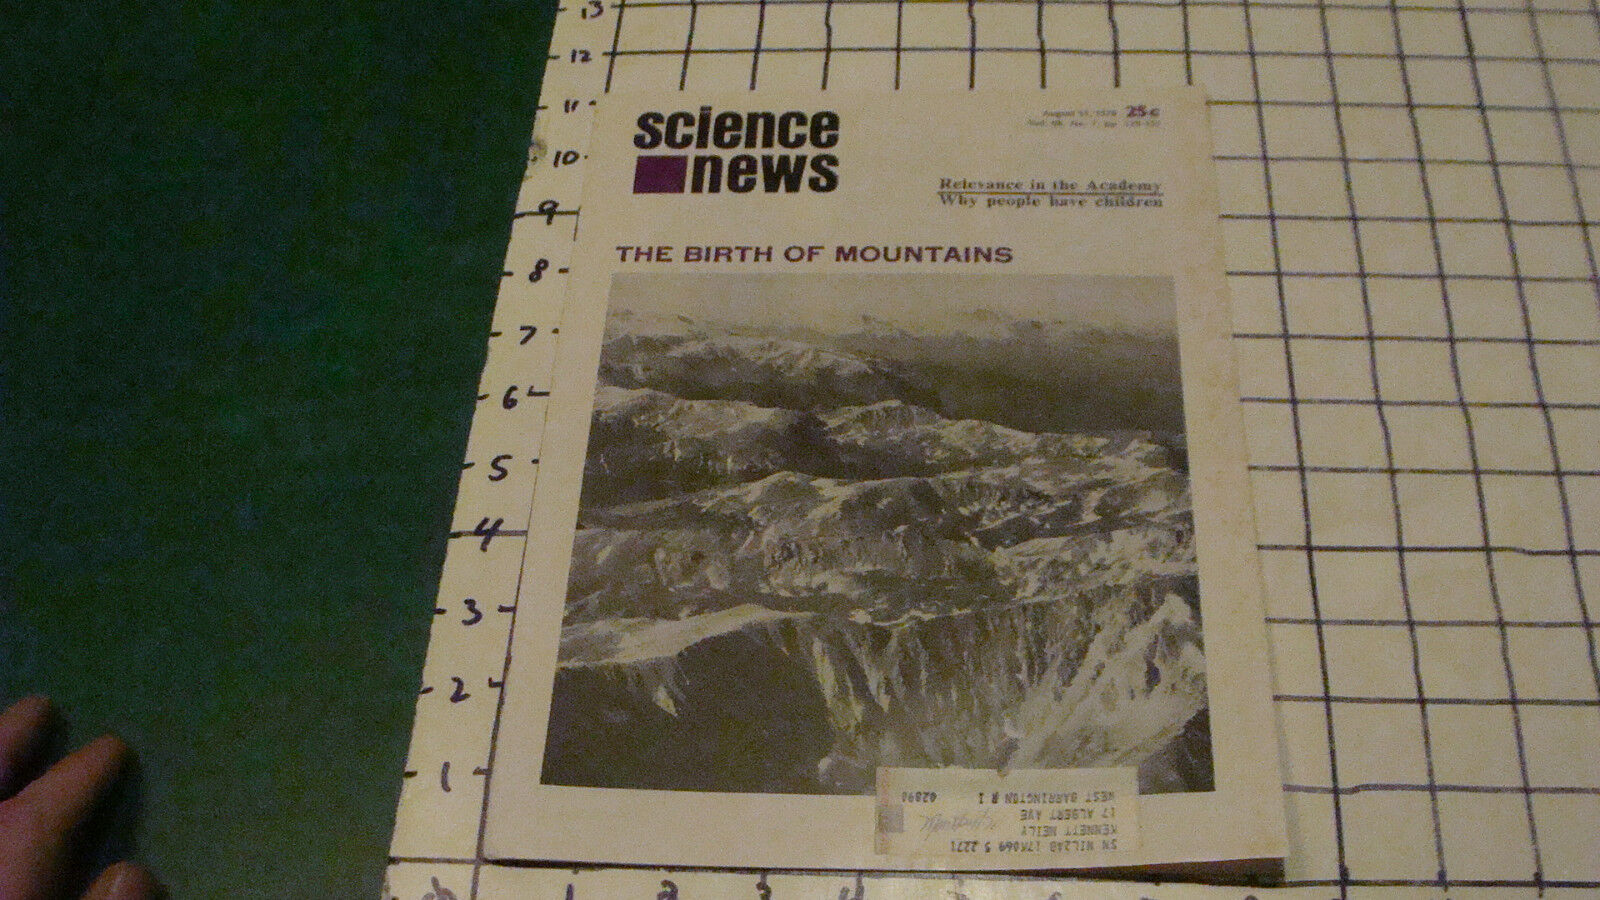 SCIENCE NEWS august 15, 1970 THE BIRTH OF MOUNTAINS, aprox 20 pages  SPOTTY